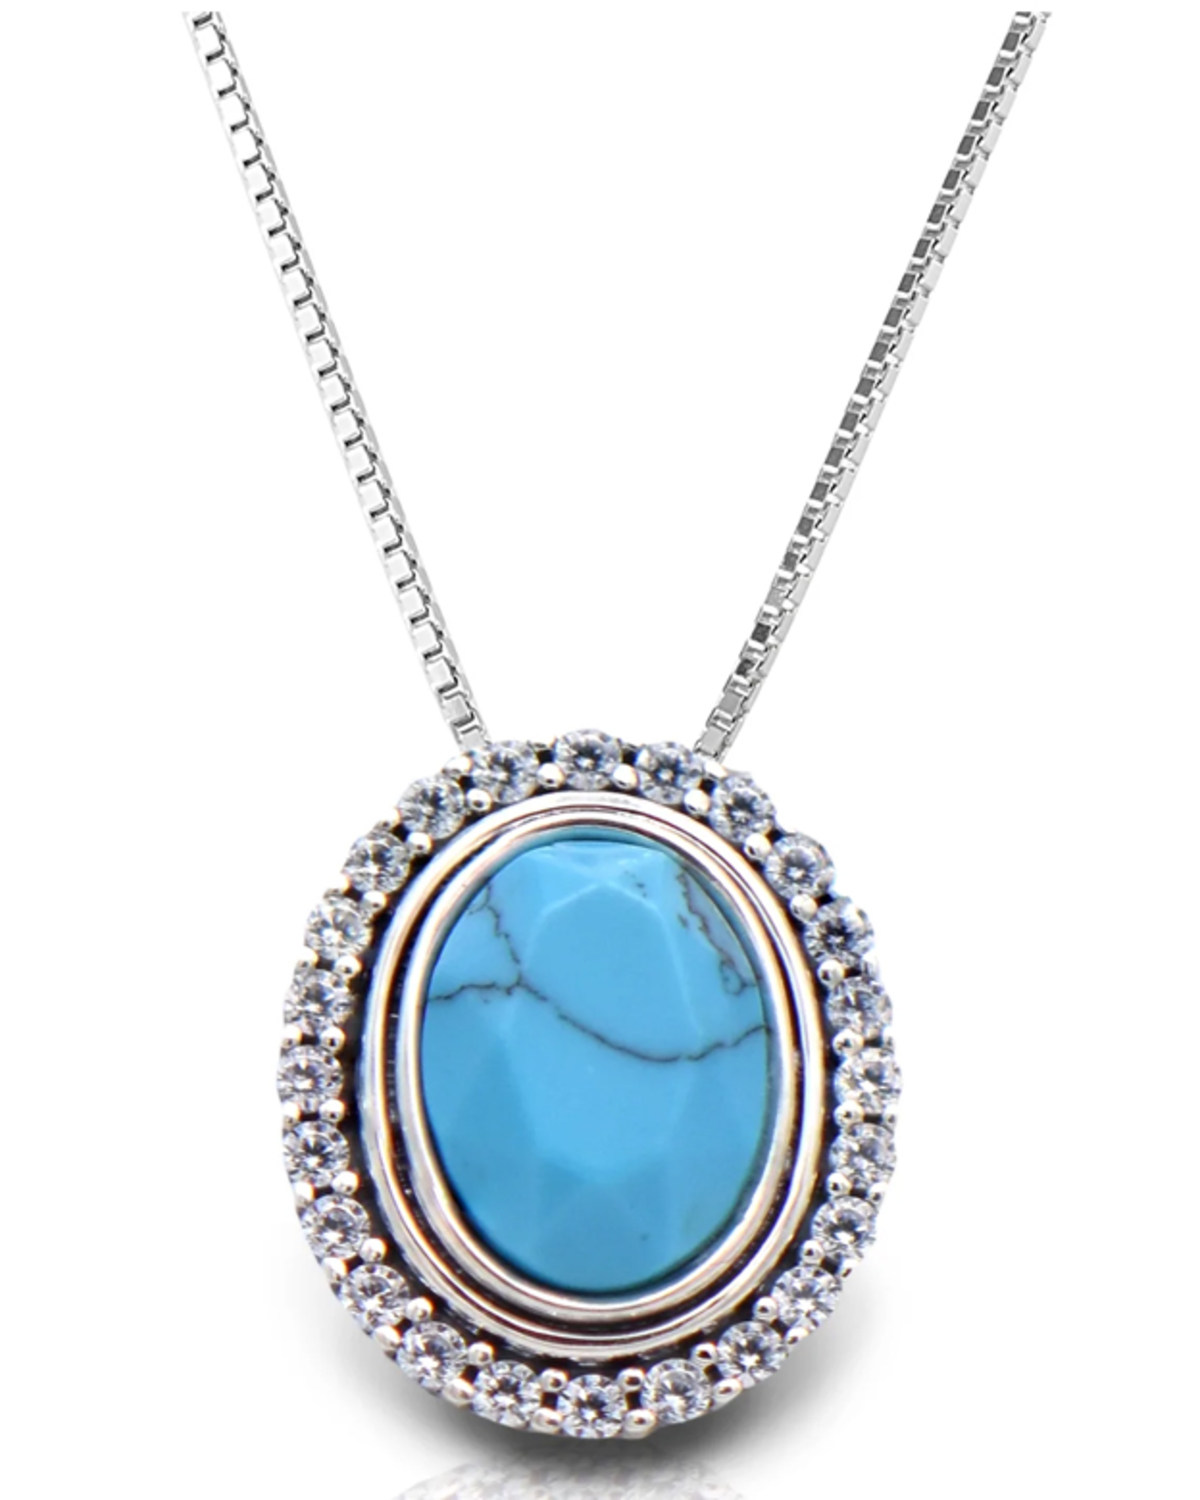 Kelly Herd Women's Turquoise Oval Pendant Silver Necklace